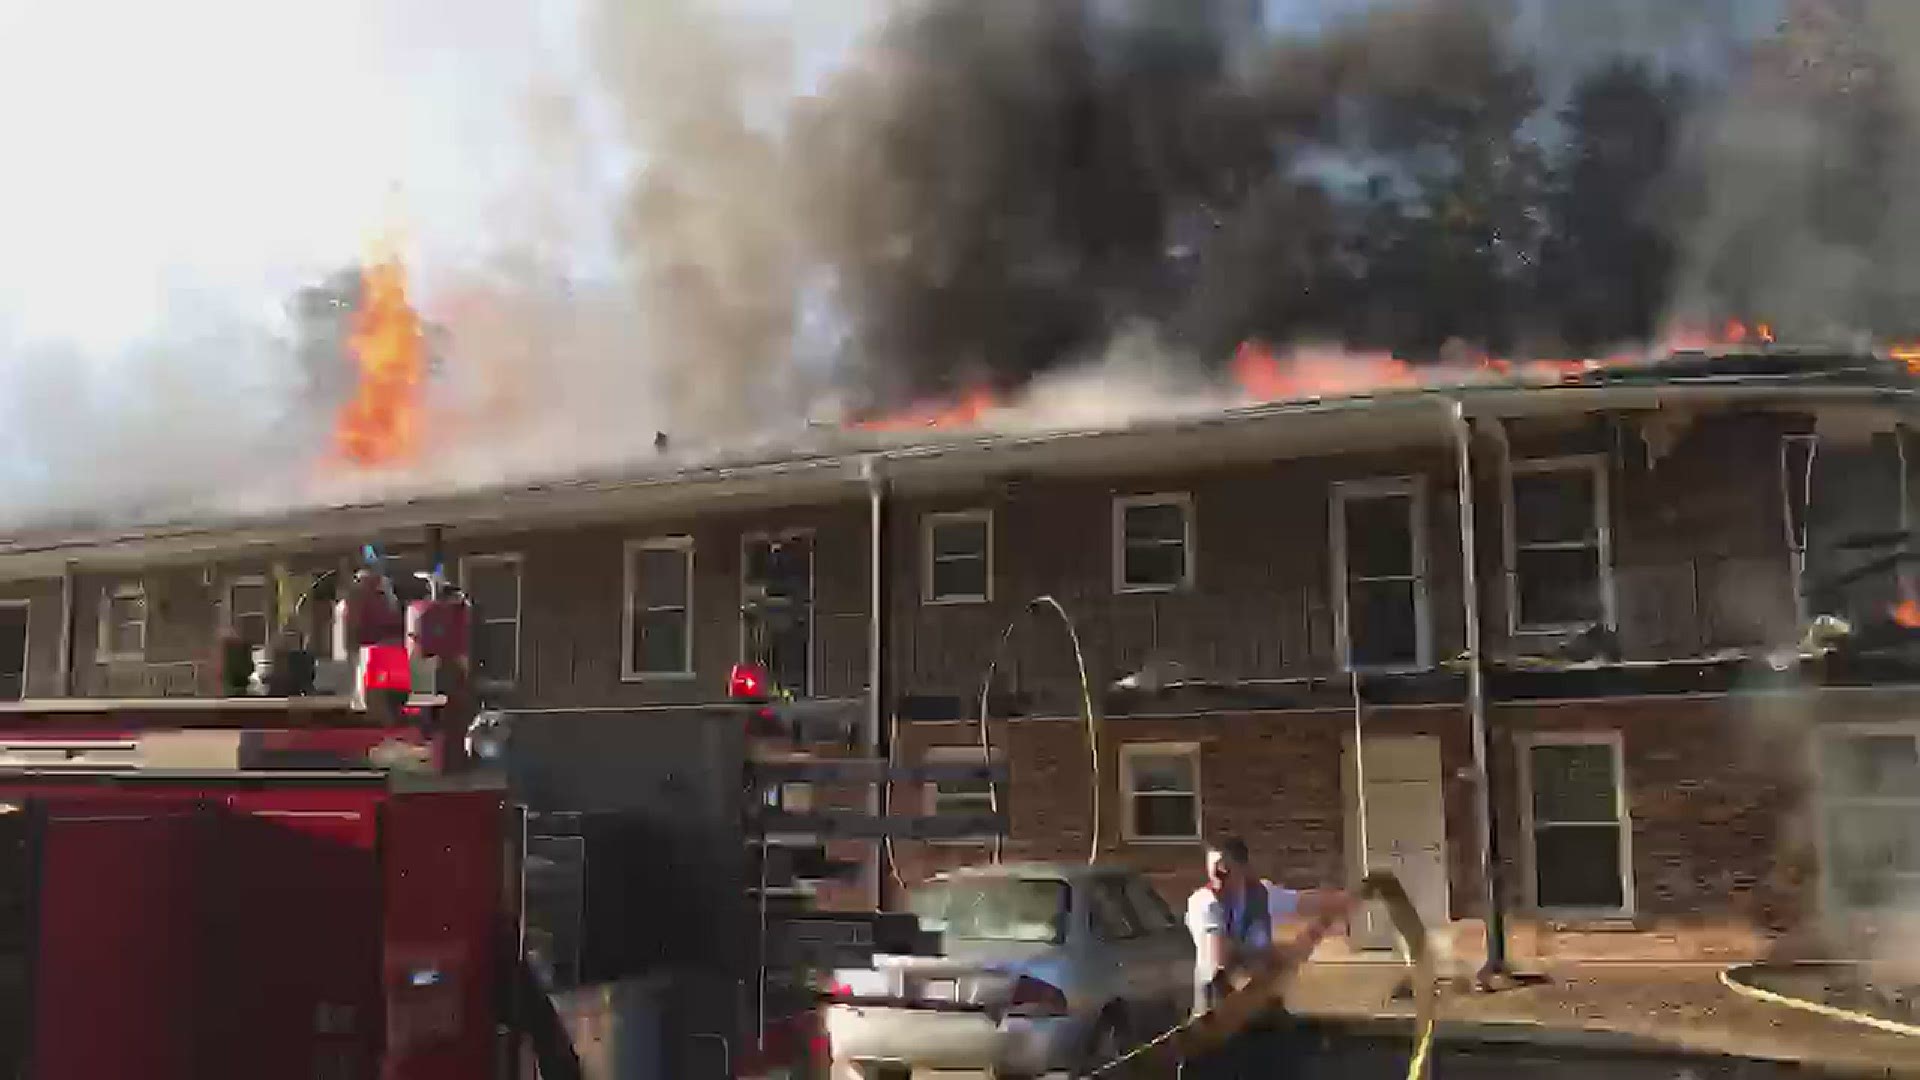 Winston-Salem Fire Department tweeted video of the building on Stagecoach Road up in flames.